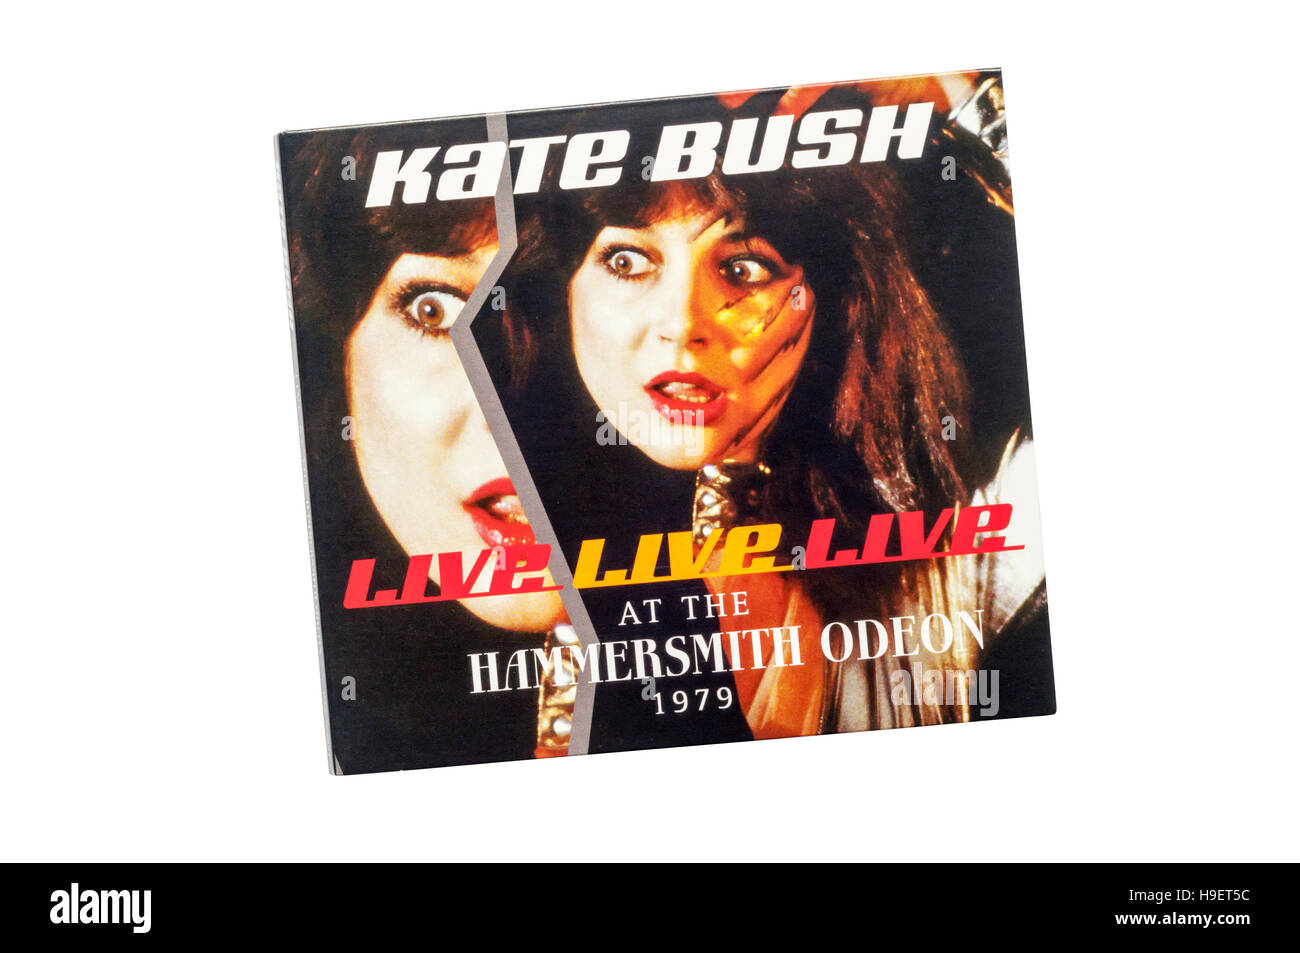 Kate Bush Live at the Hammersmith Odeon was a 1979 live concert by the English musician Kate Bush. It was released in 2012. Stock Photo